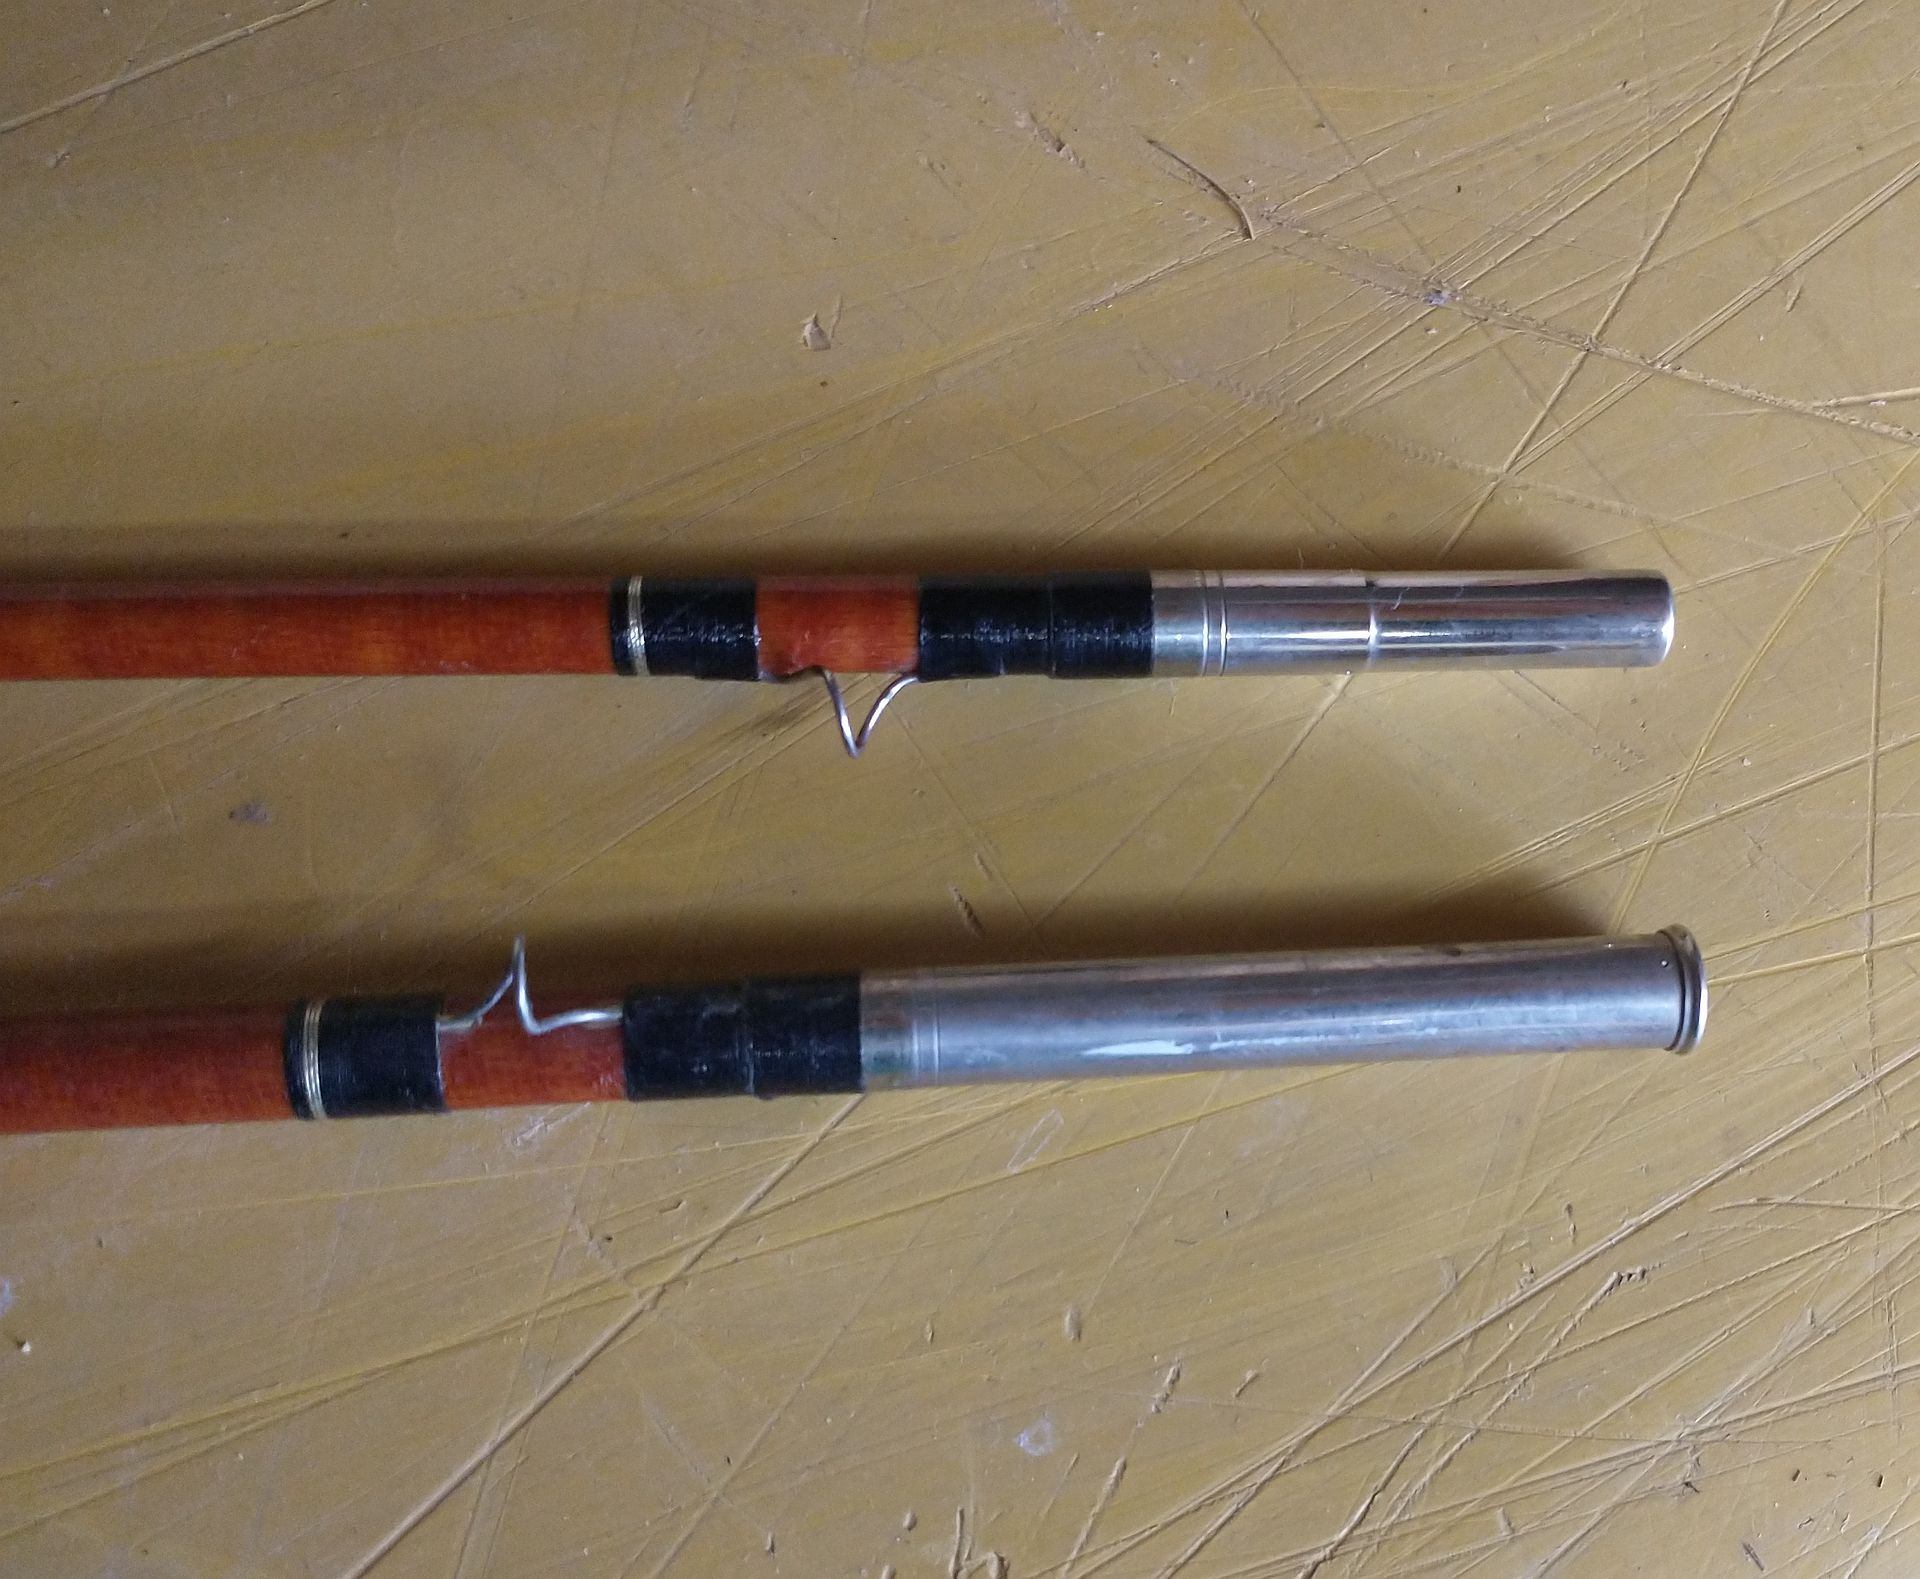 Lube ferrules, Fishing with Fiberglass Fly Rods